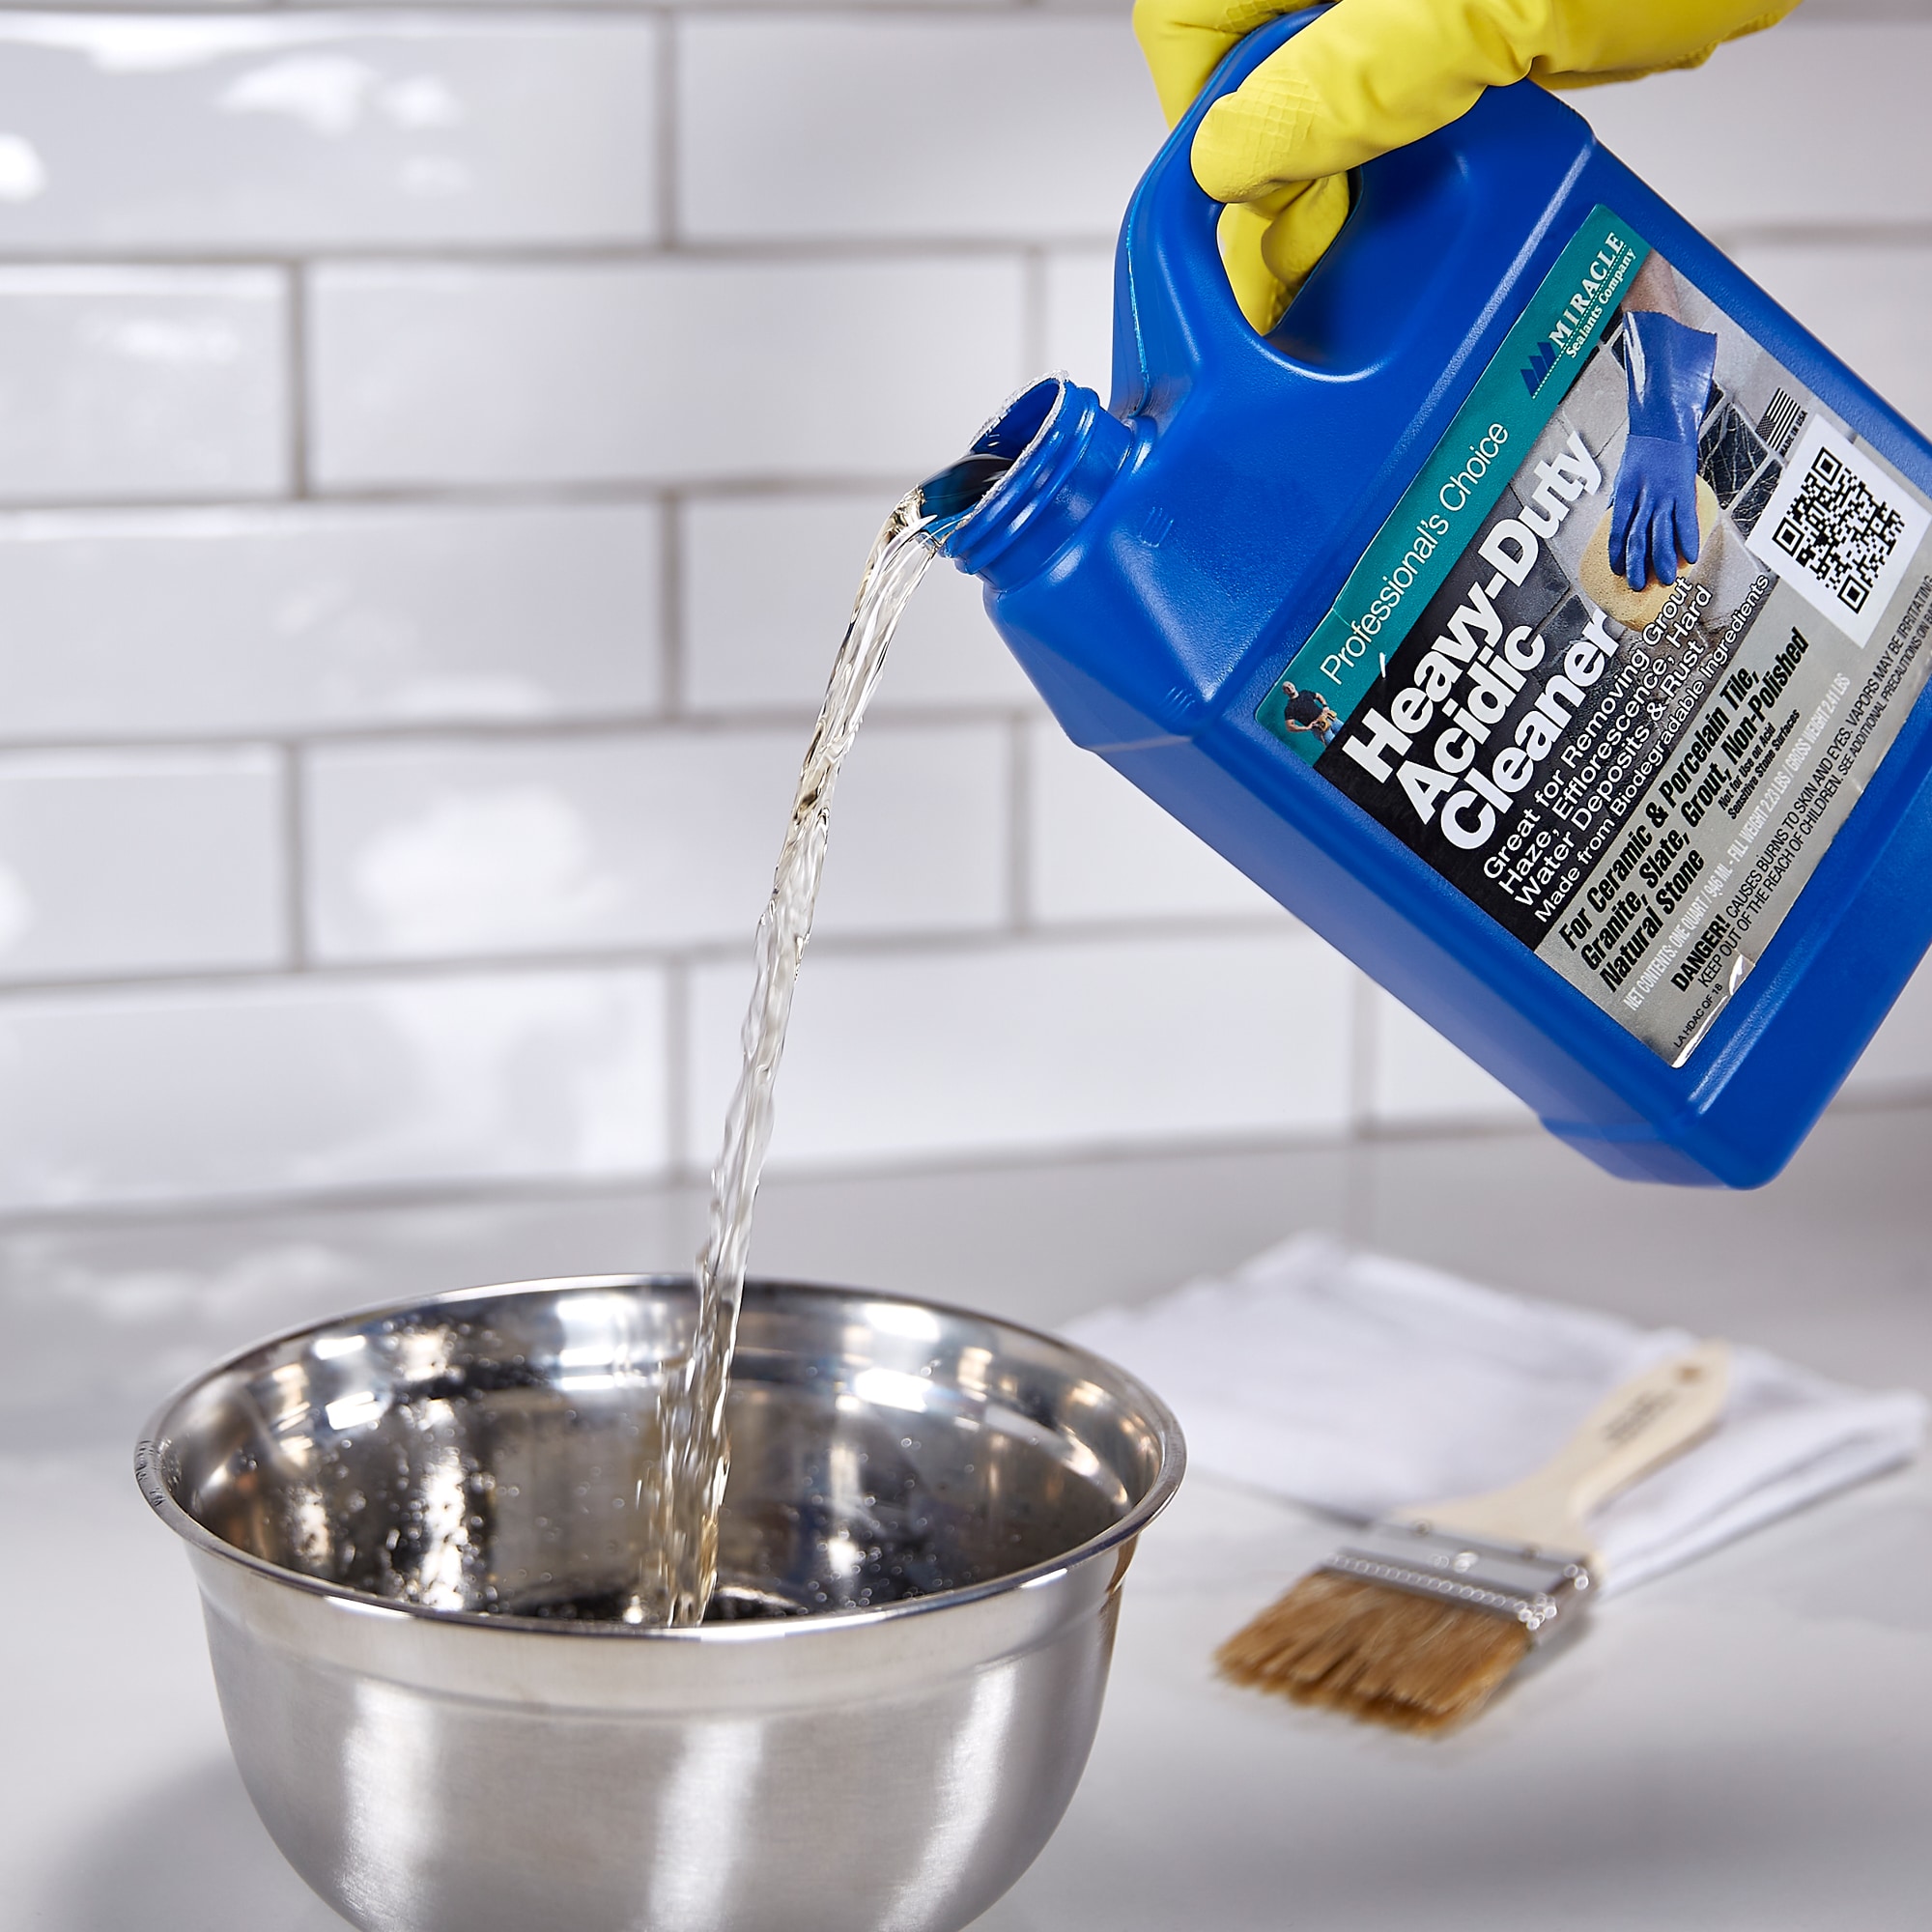  Quality Chemical Grout Glo - heavy-duty acid restroom tile,  grout and fixture cleaner. Removes rust, scale & calcium deposits.-5 gallon  pail : Tools & Home Improvement